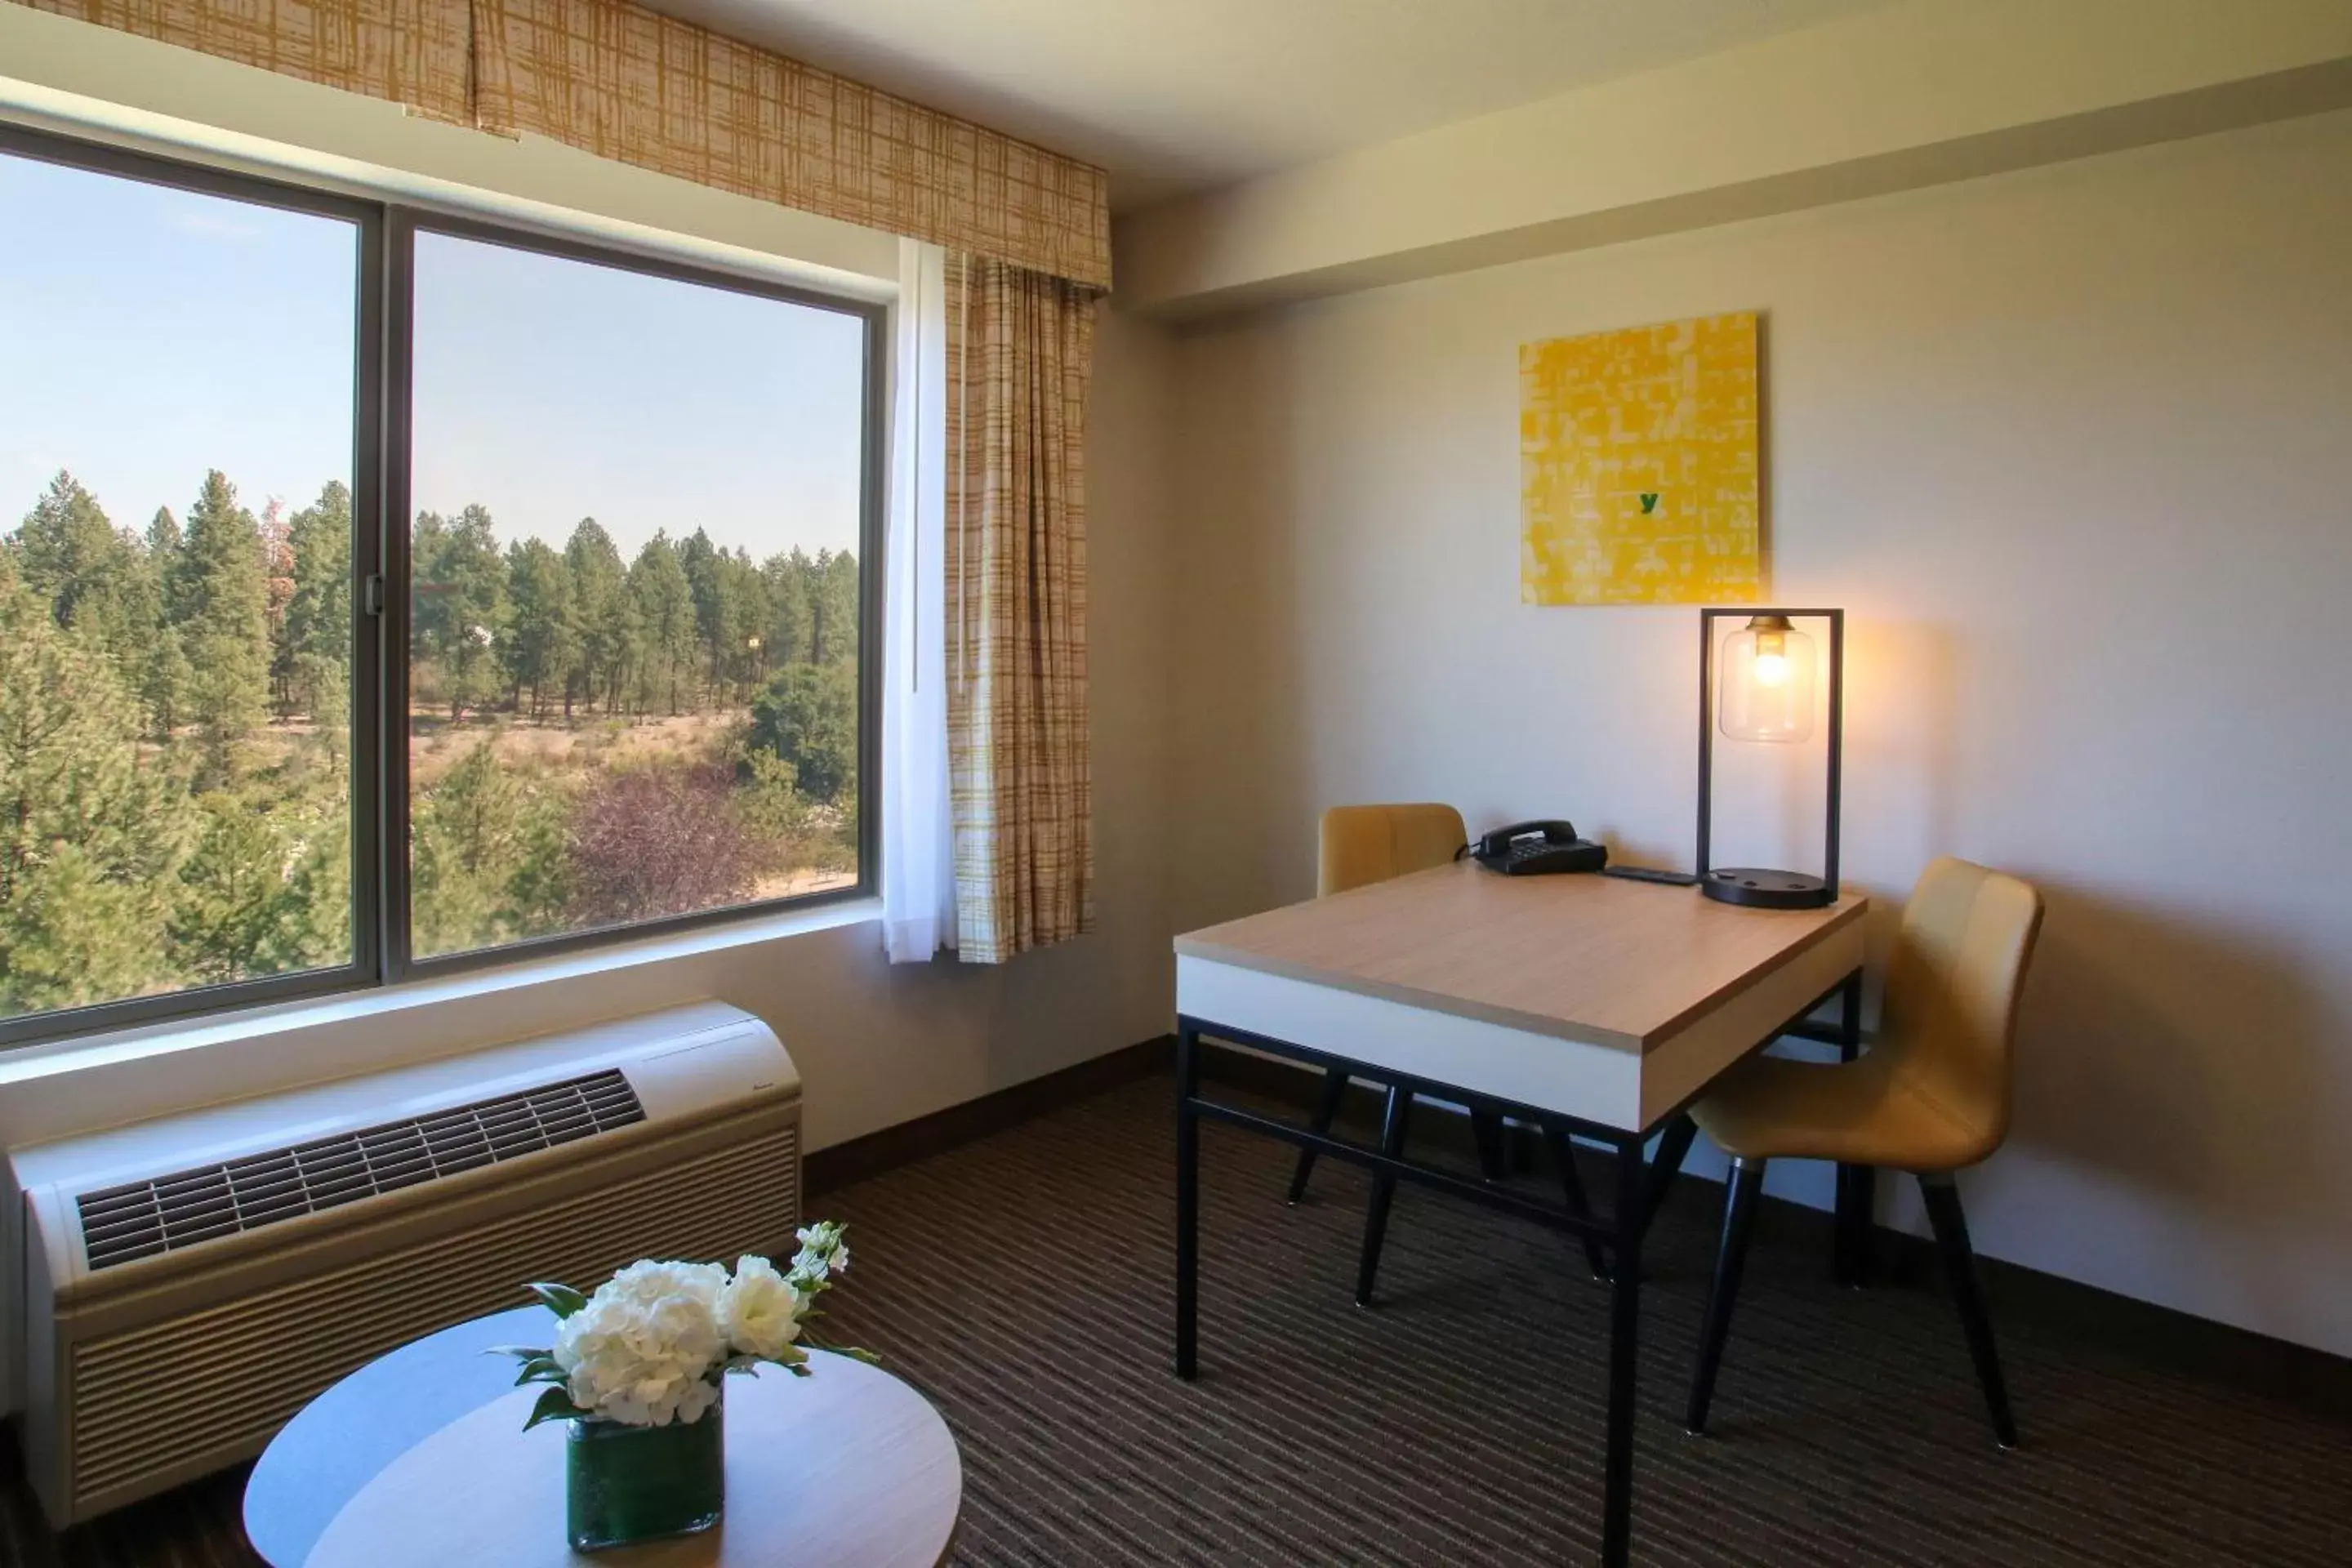 Seating area, Dining Area in Oxford Suites Spokane Valley